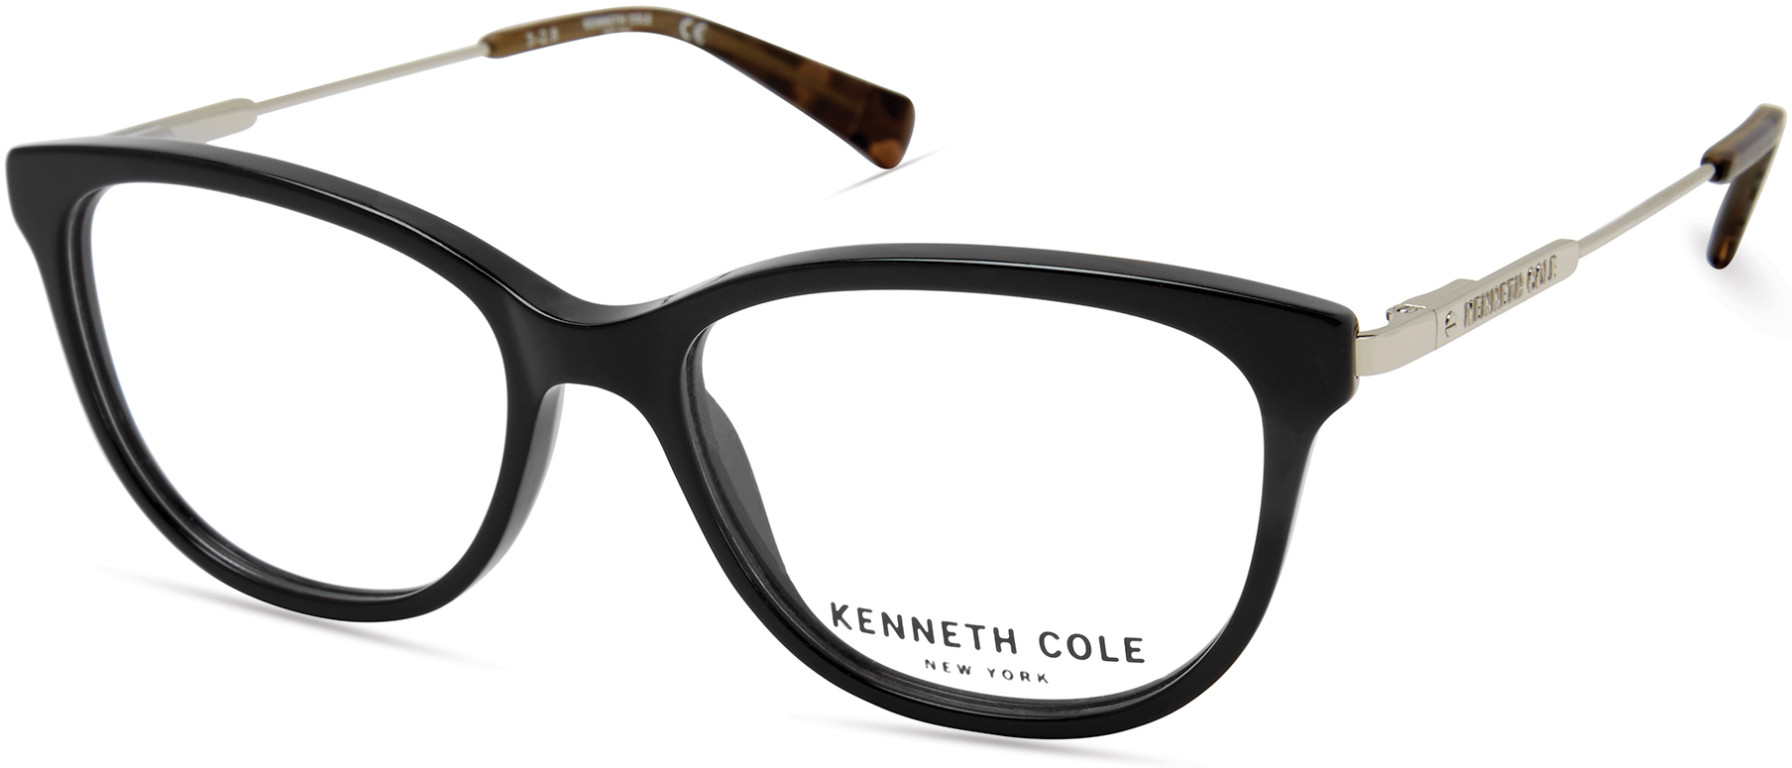 KENNETH COLE NY 0298 001